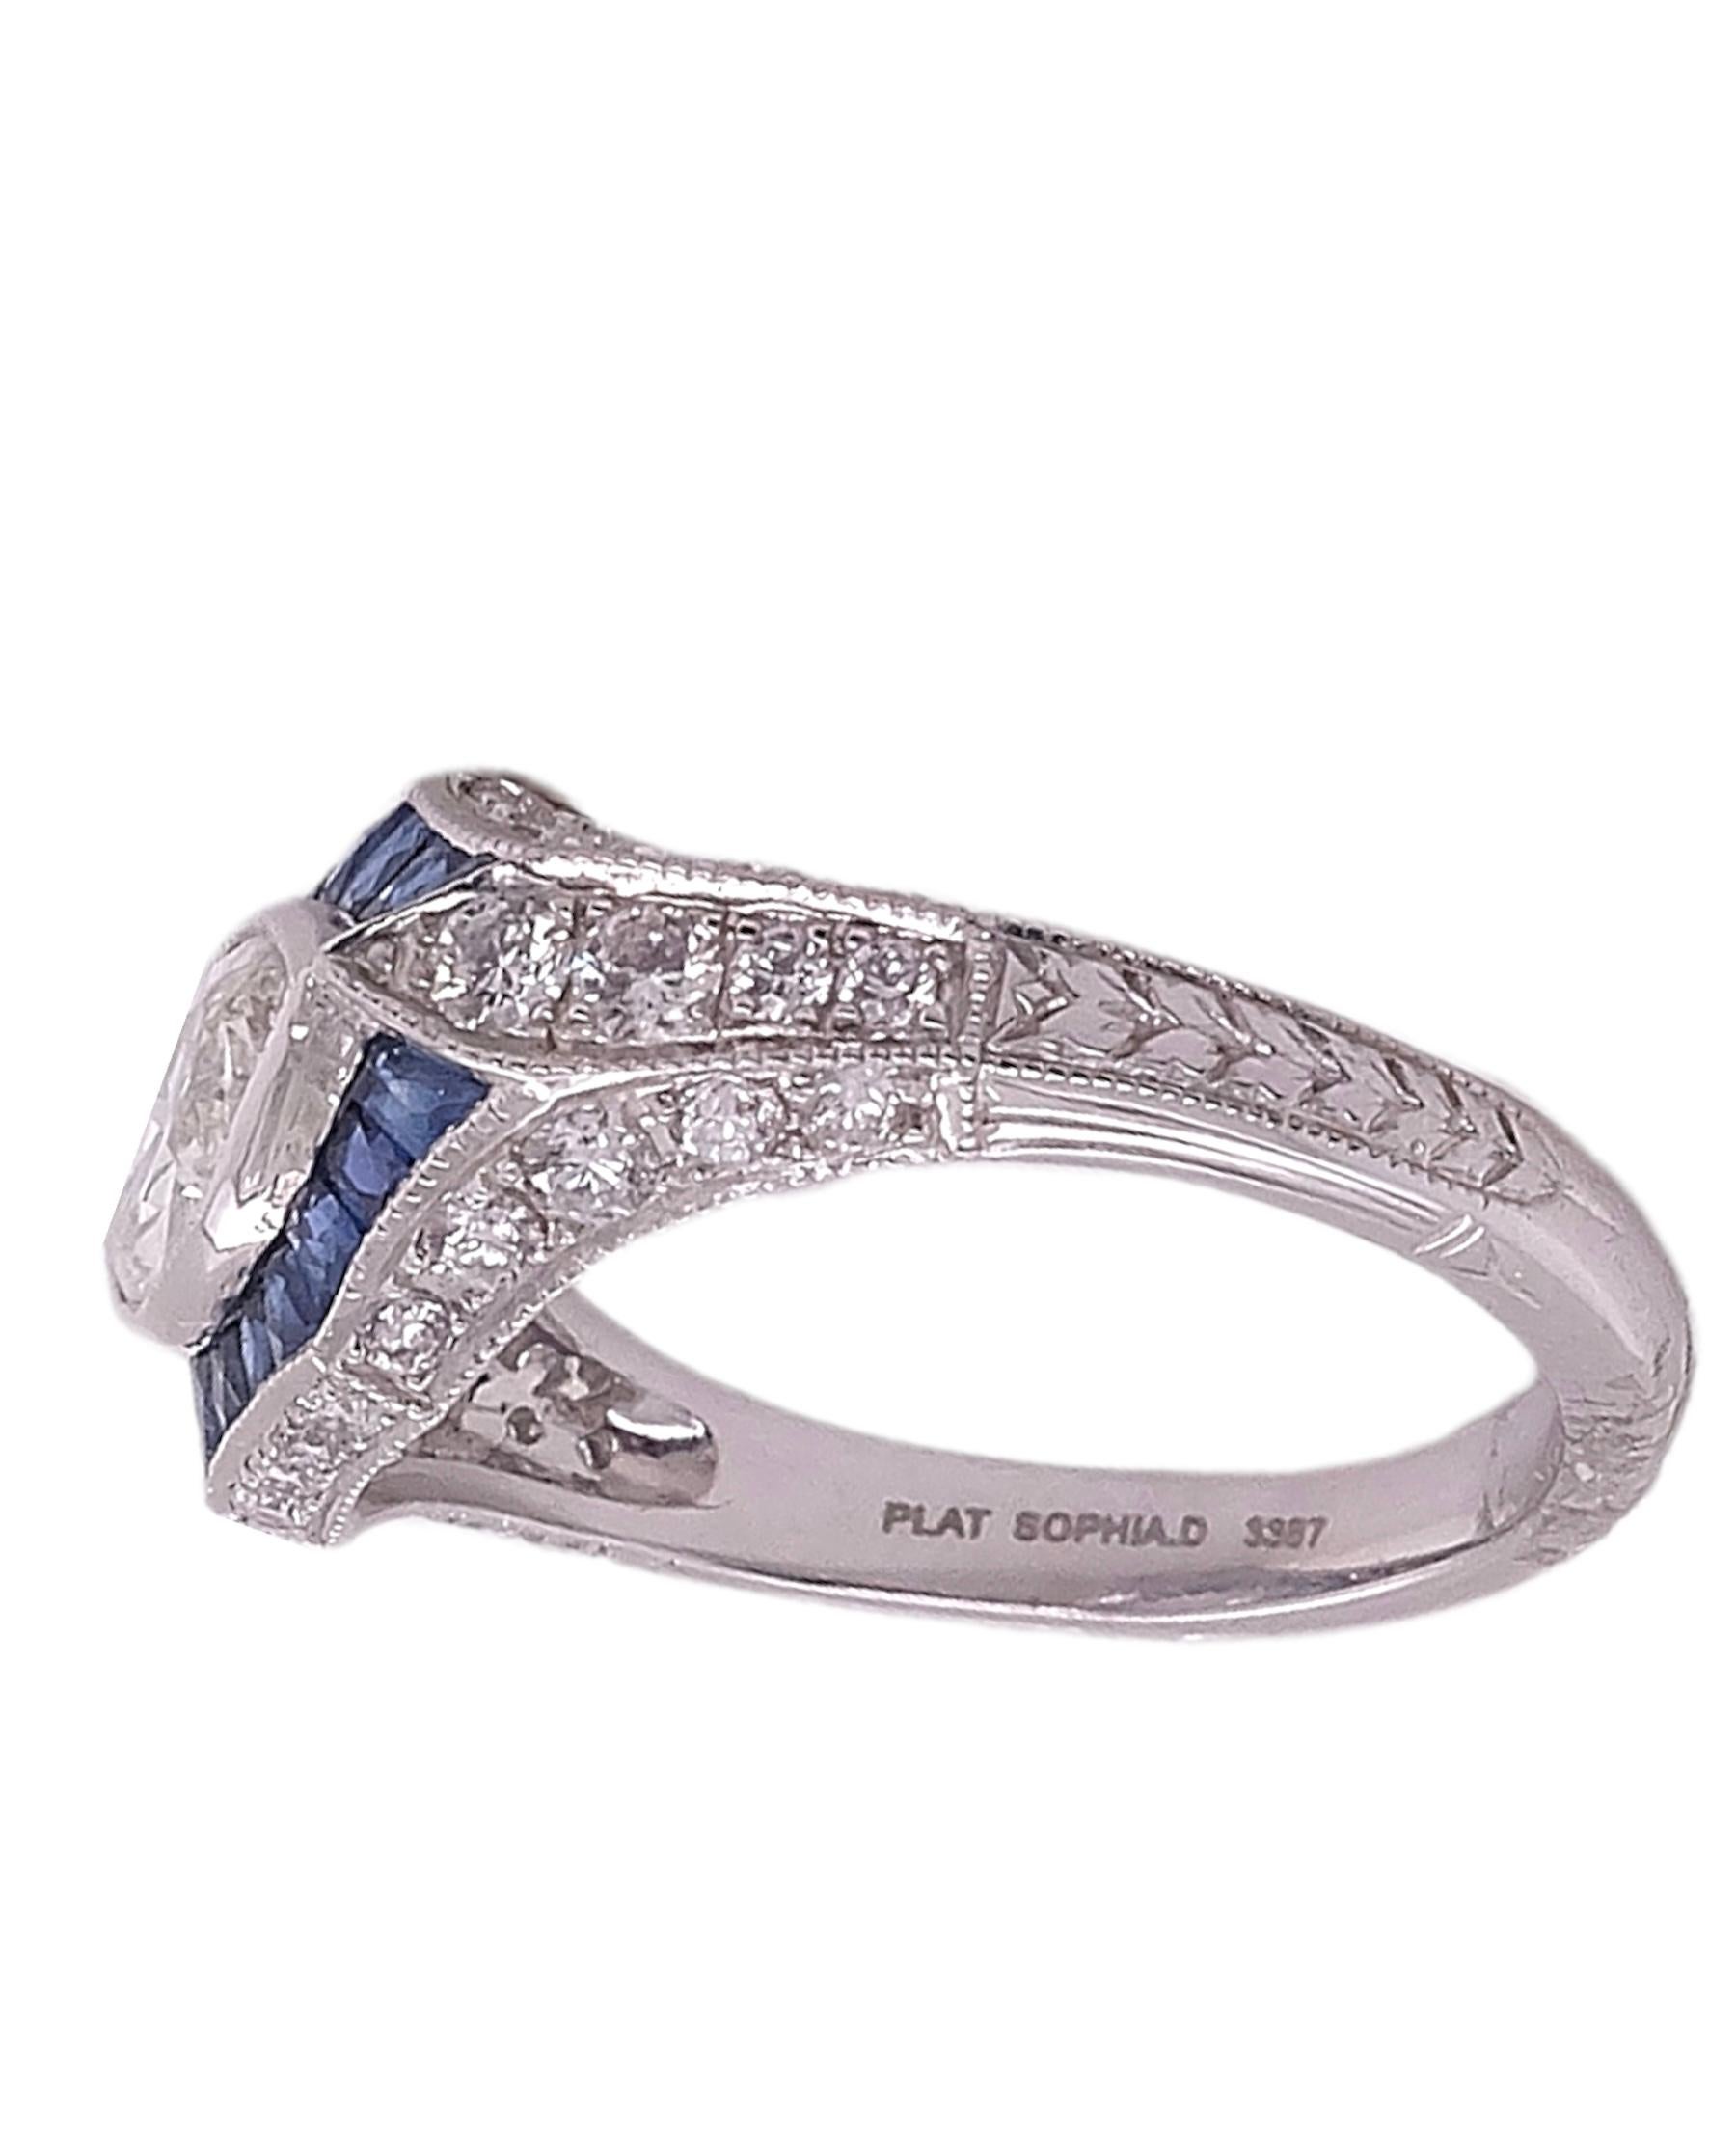 Beautifully designed Art Deco Ring by Sophia D that features 1.02 marquise cut center stone complemented with 0.56 Carat blue sapphires and 0.61 carat small round diamonds. The ring is set in platinum and a size 6 1/2. It is available for